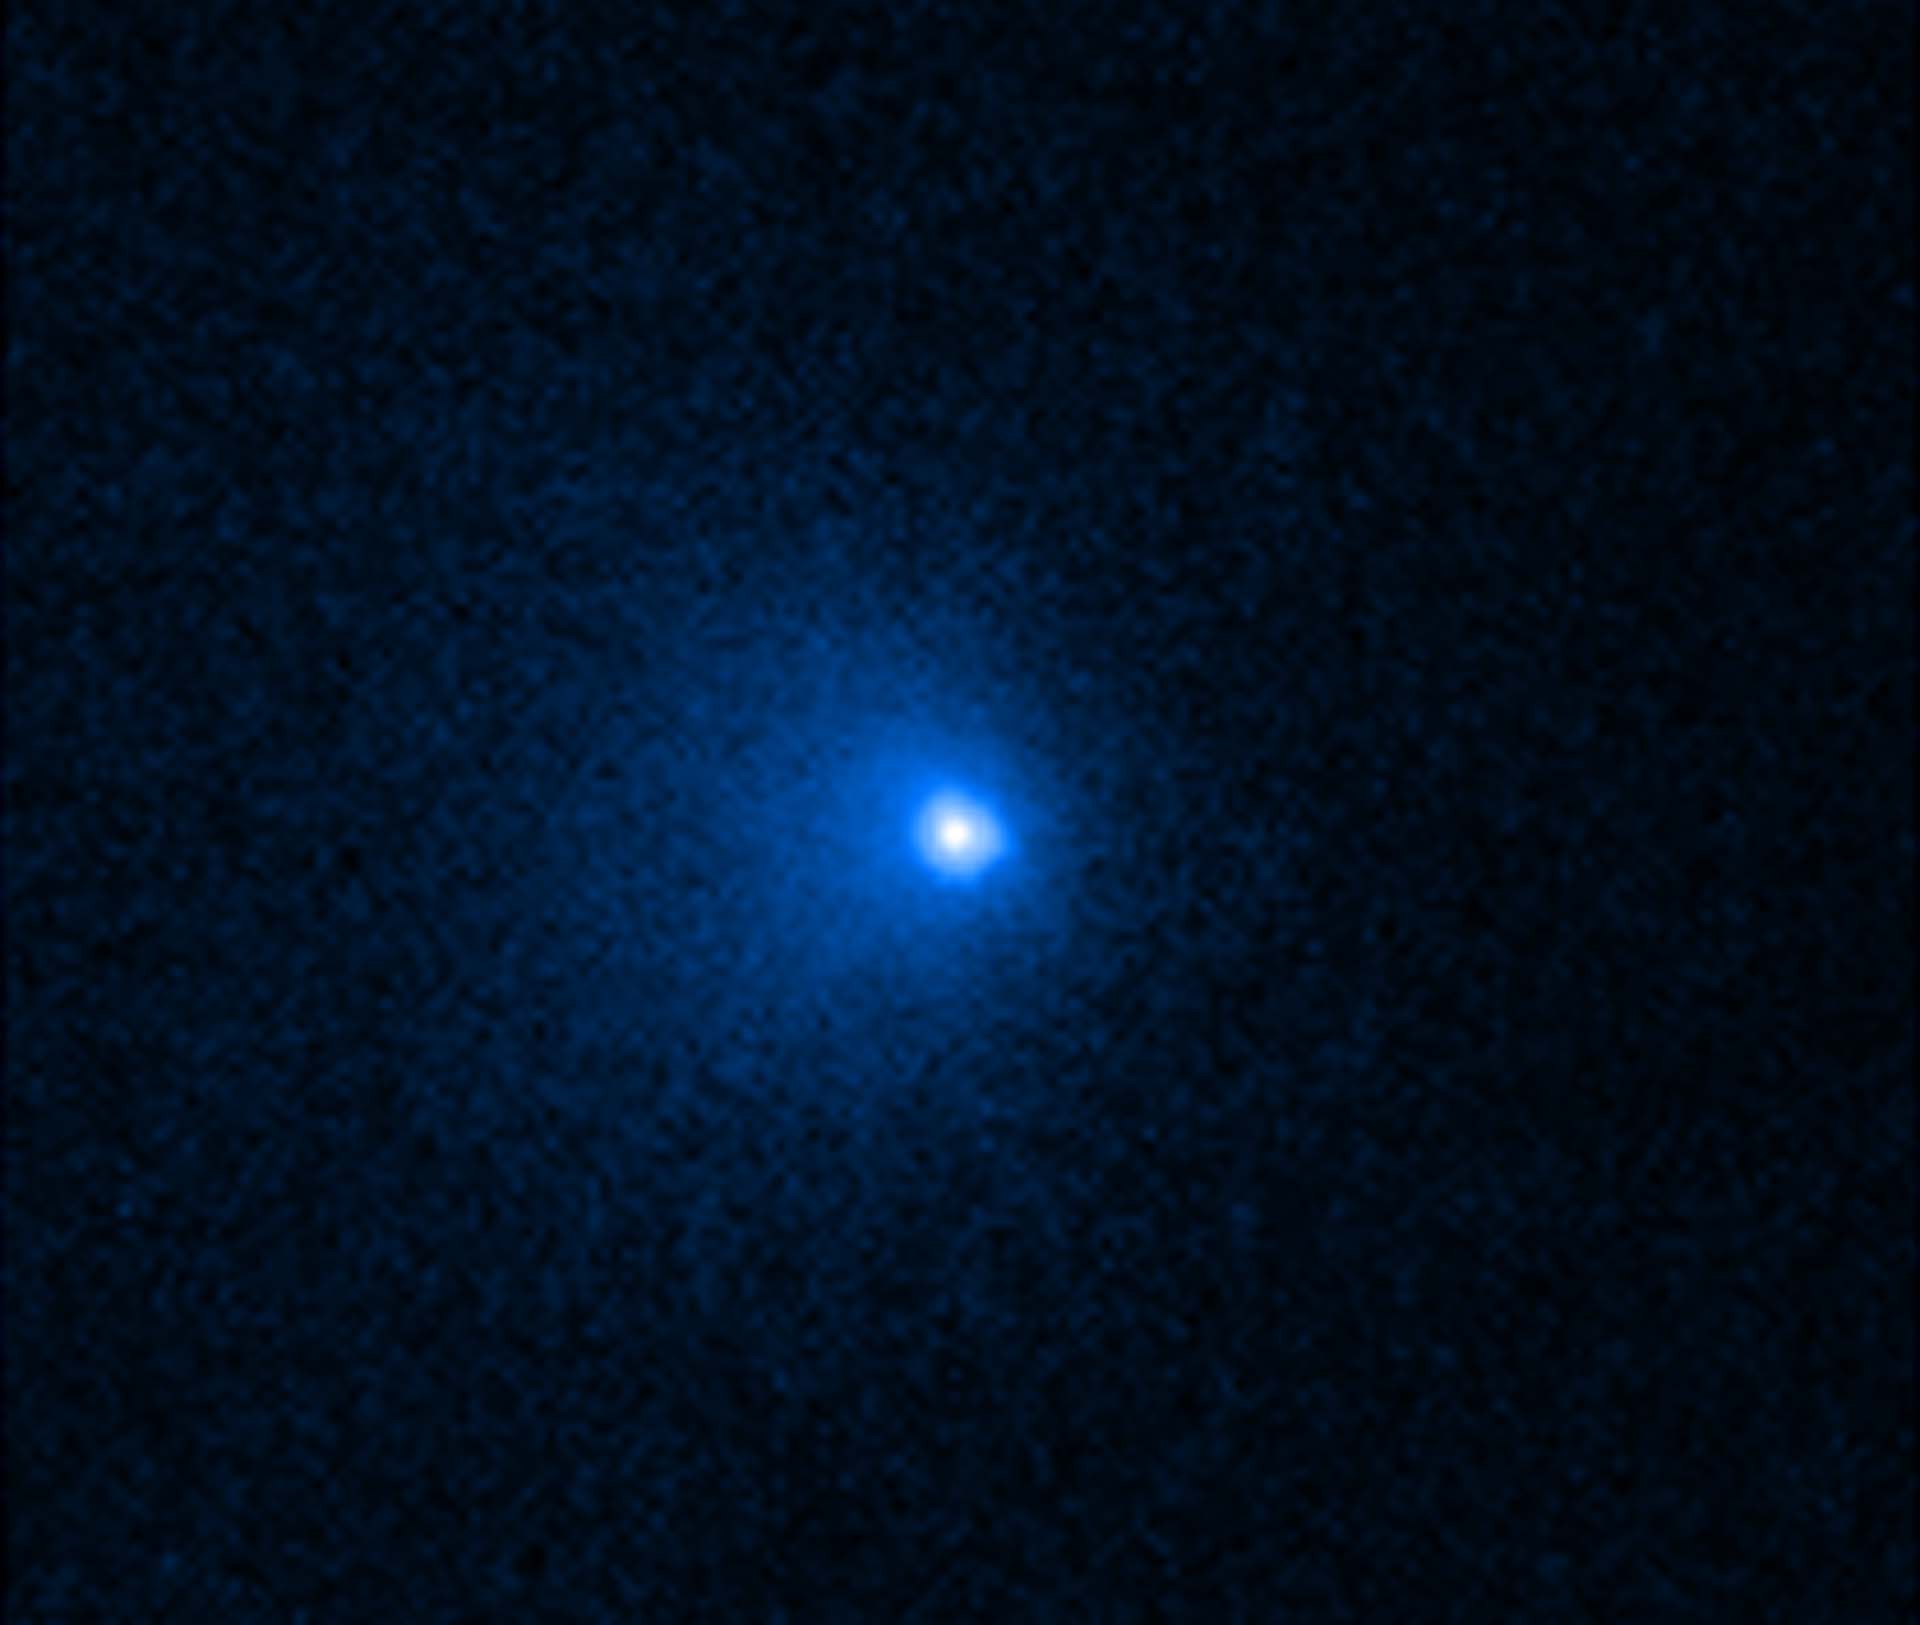 Comet C/2014 UN271 Nucleus Is Isolated From Surrounding Coma